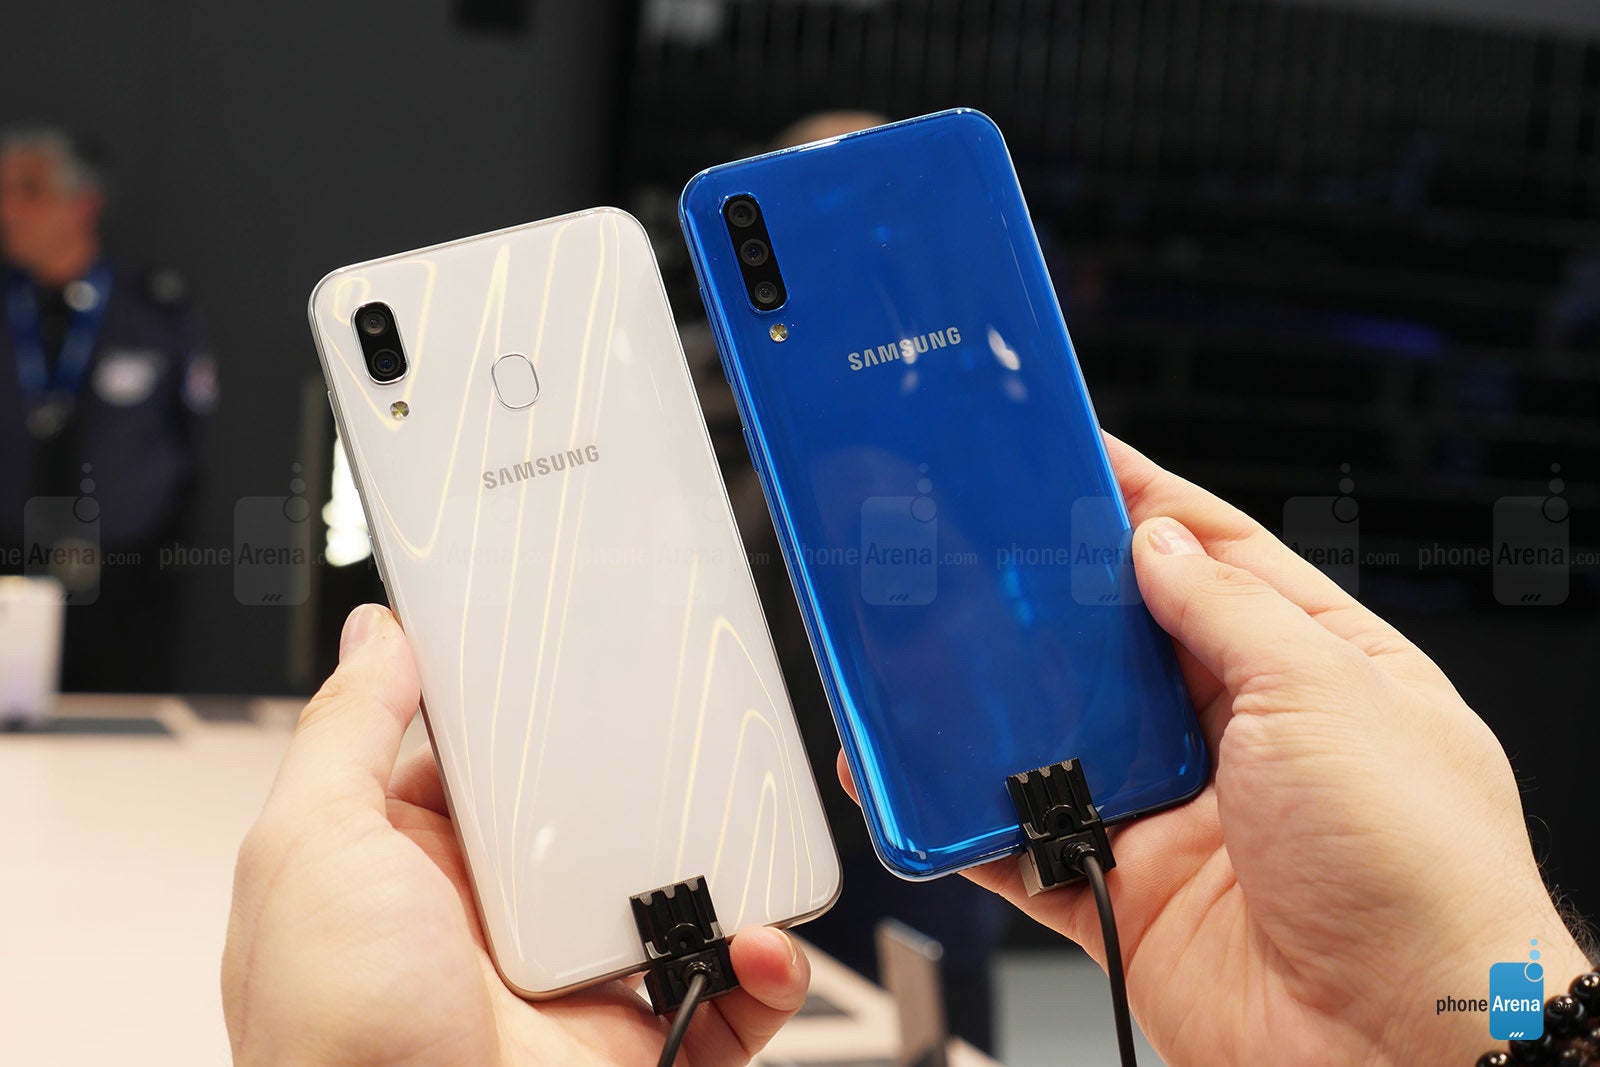 Samsung Galaxy A30 (left) and A50 (right) - Not pricey, yet elegant: Samsung Galaxy A30 is now (unofficially) sold in the US, 1-year warranty included